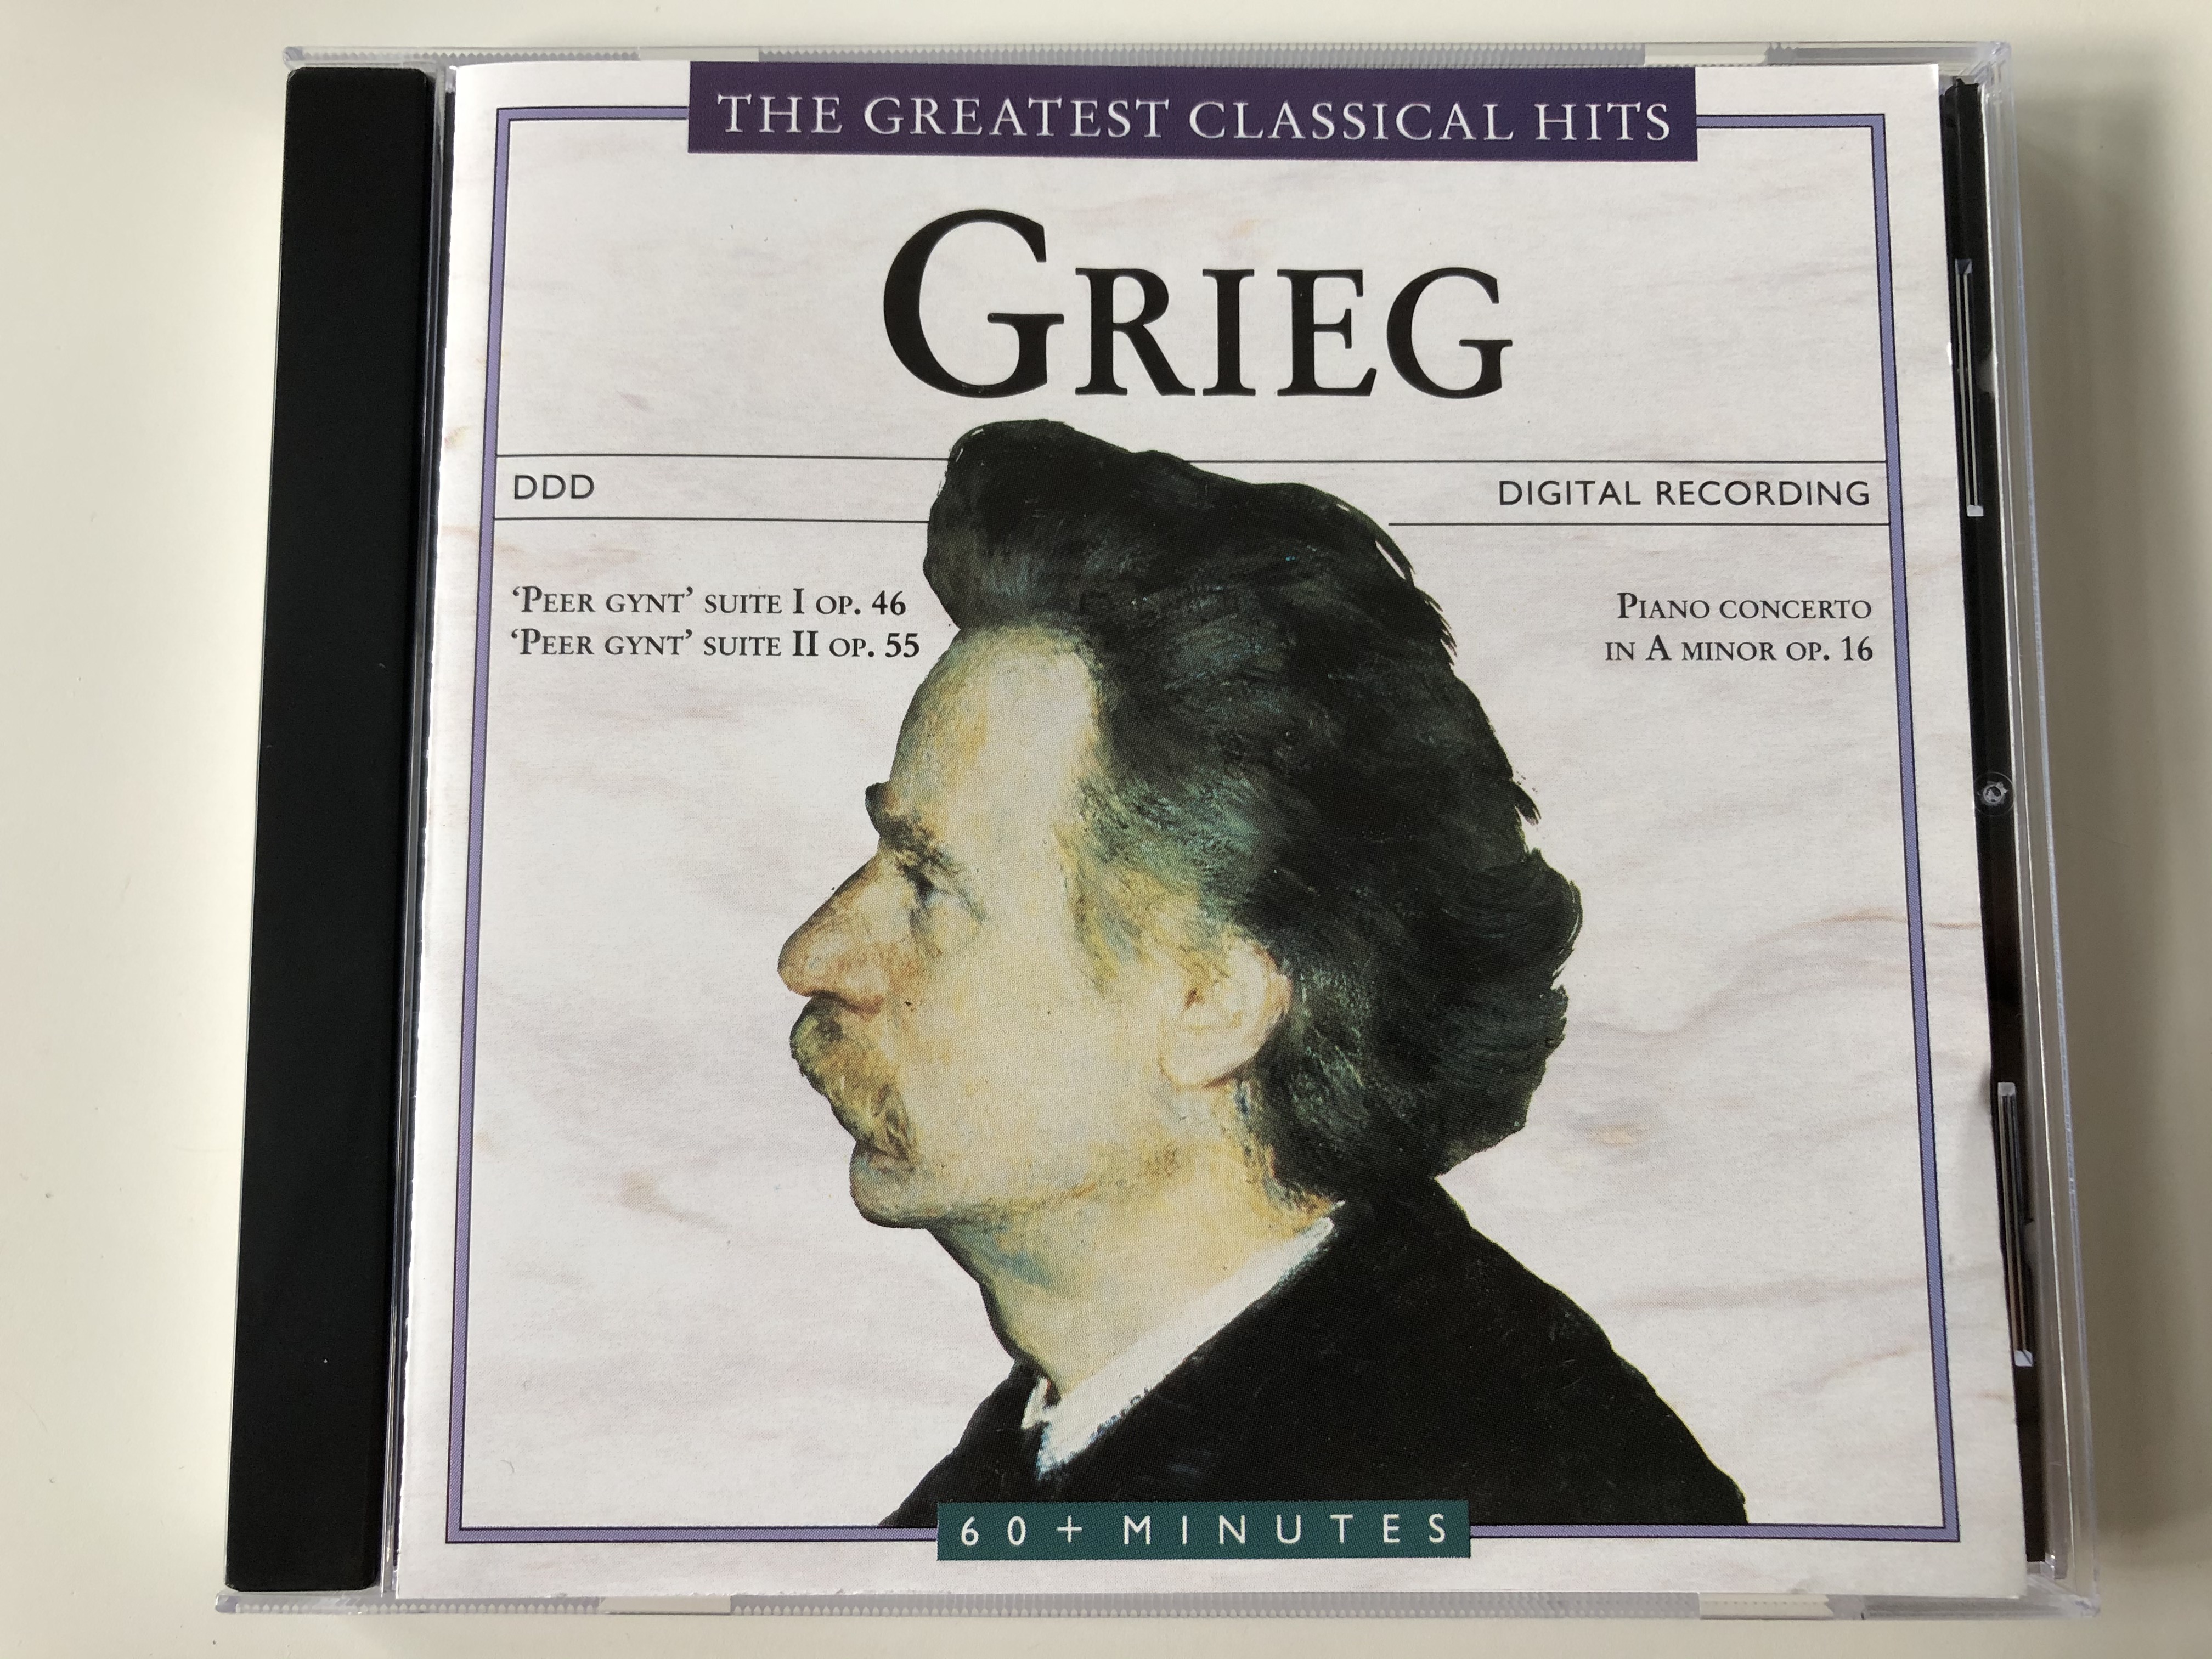 the-greatest-classical-hits-grieg-peer-gynt-suite-i-op.-46-peer-gynt-suite-ii-op.-55-piano-concerto-in-a-minor-op.-16-selcor-ltd.-audio-cd-1991-stereo-gch-2401-1-.jpg